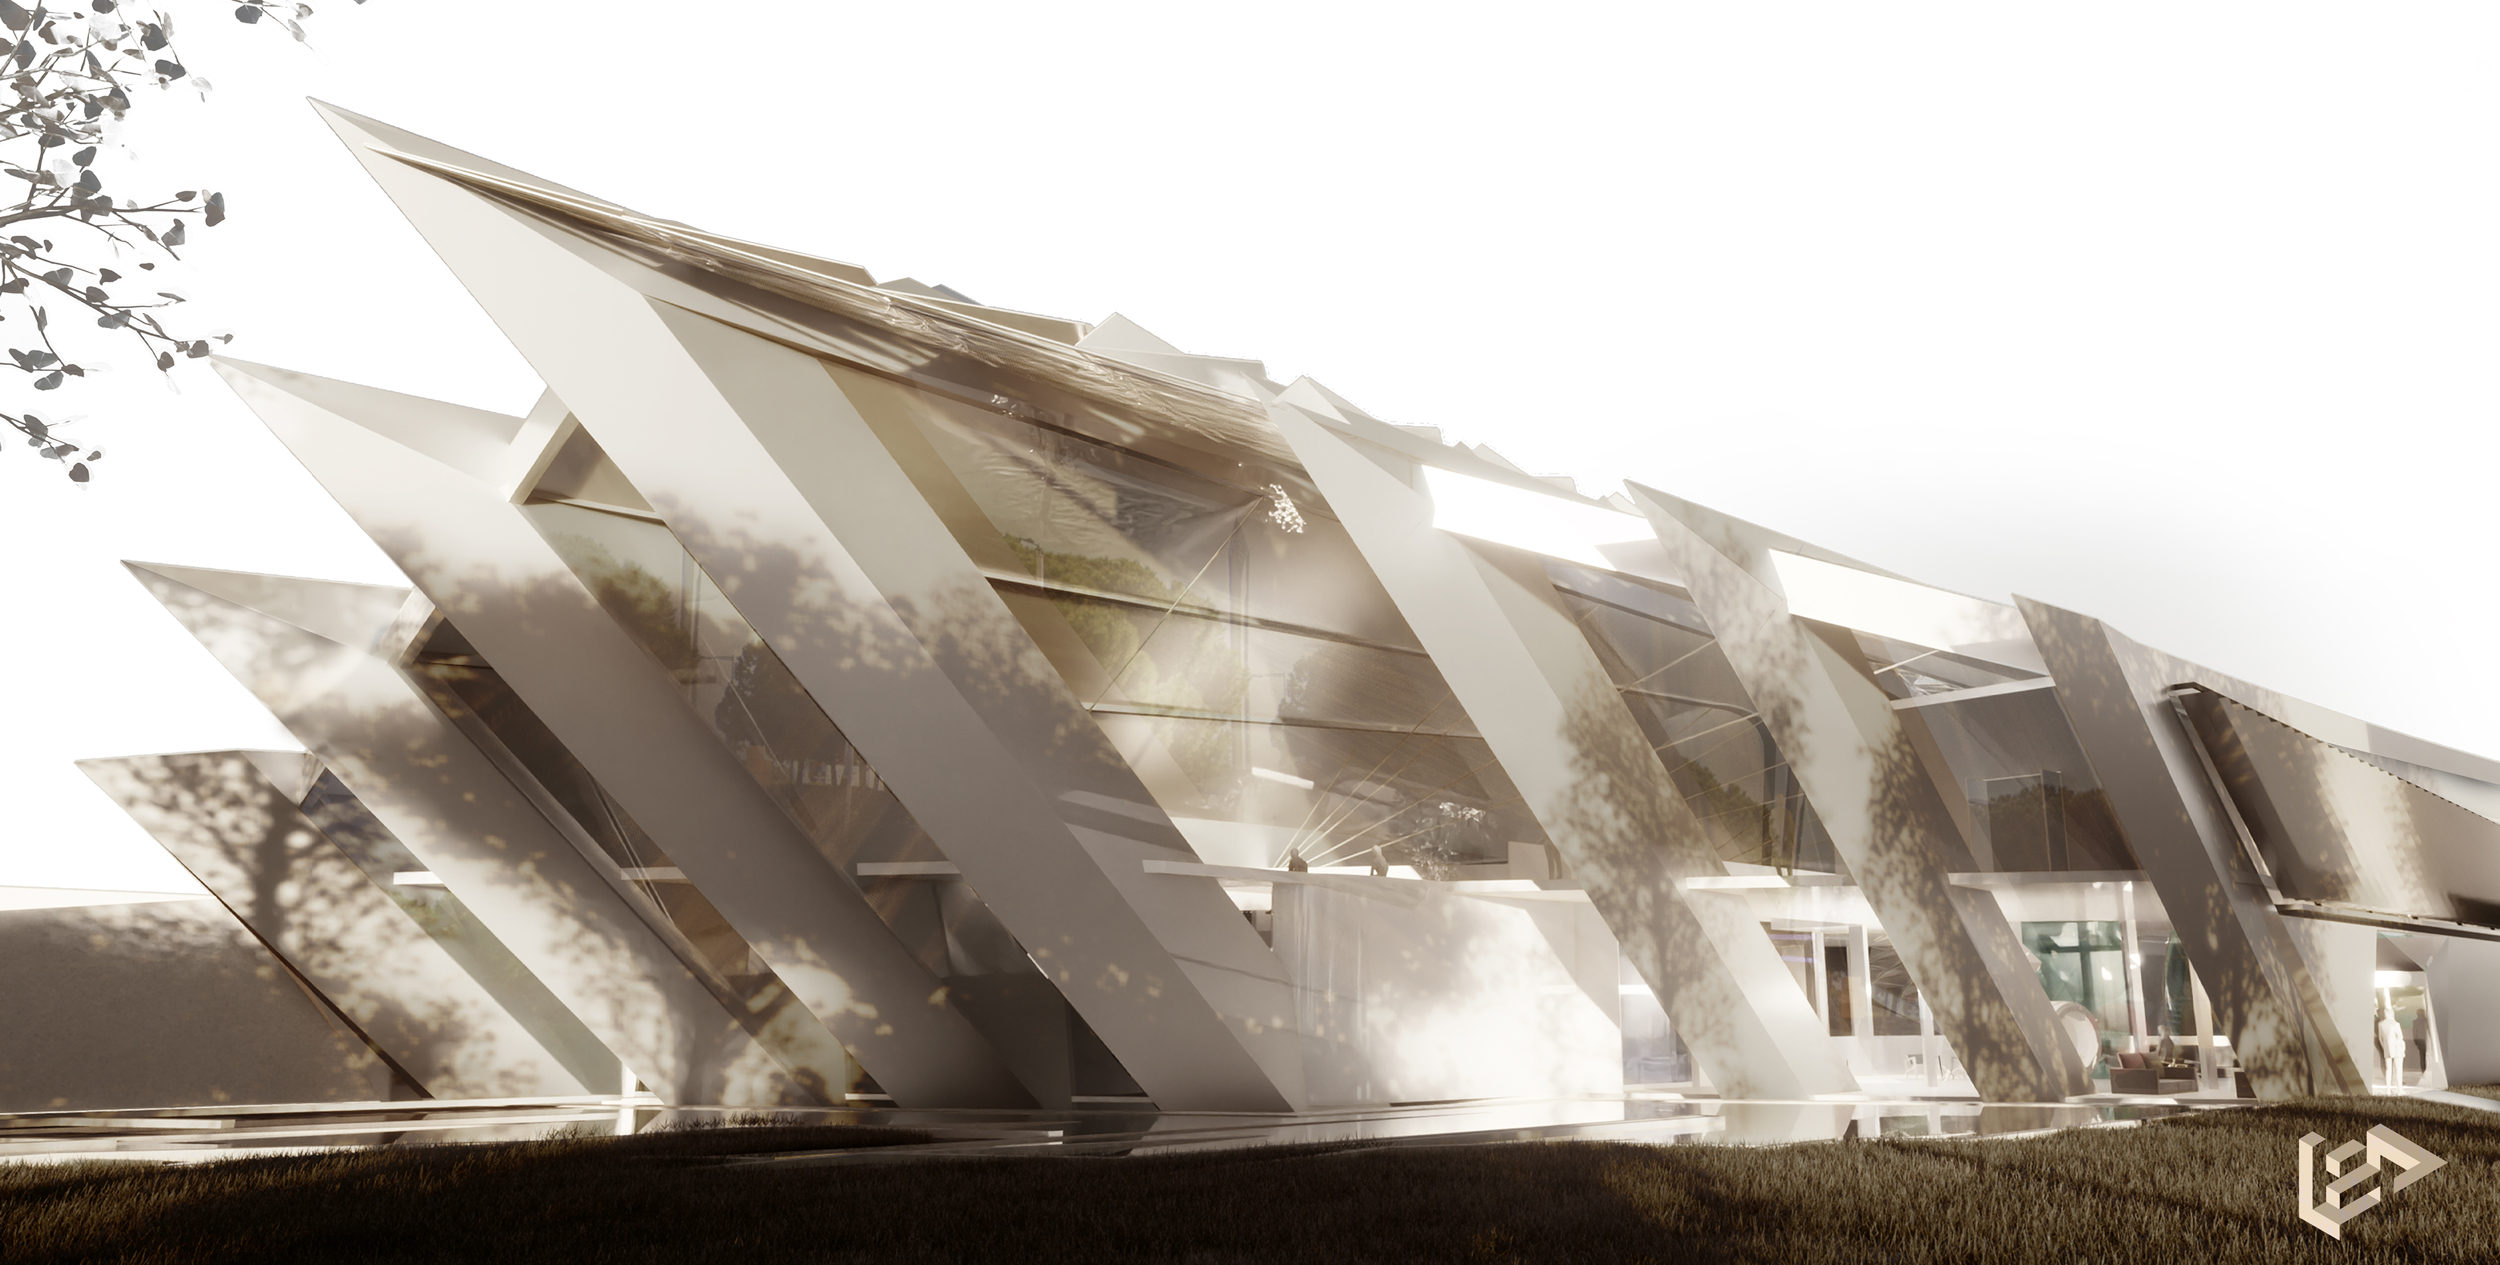 BA (Hons) Architecture work by Luke Burrows - Visualisation of the European Space Institute